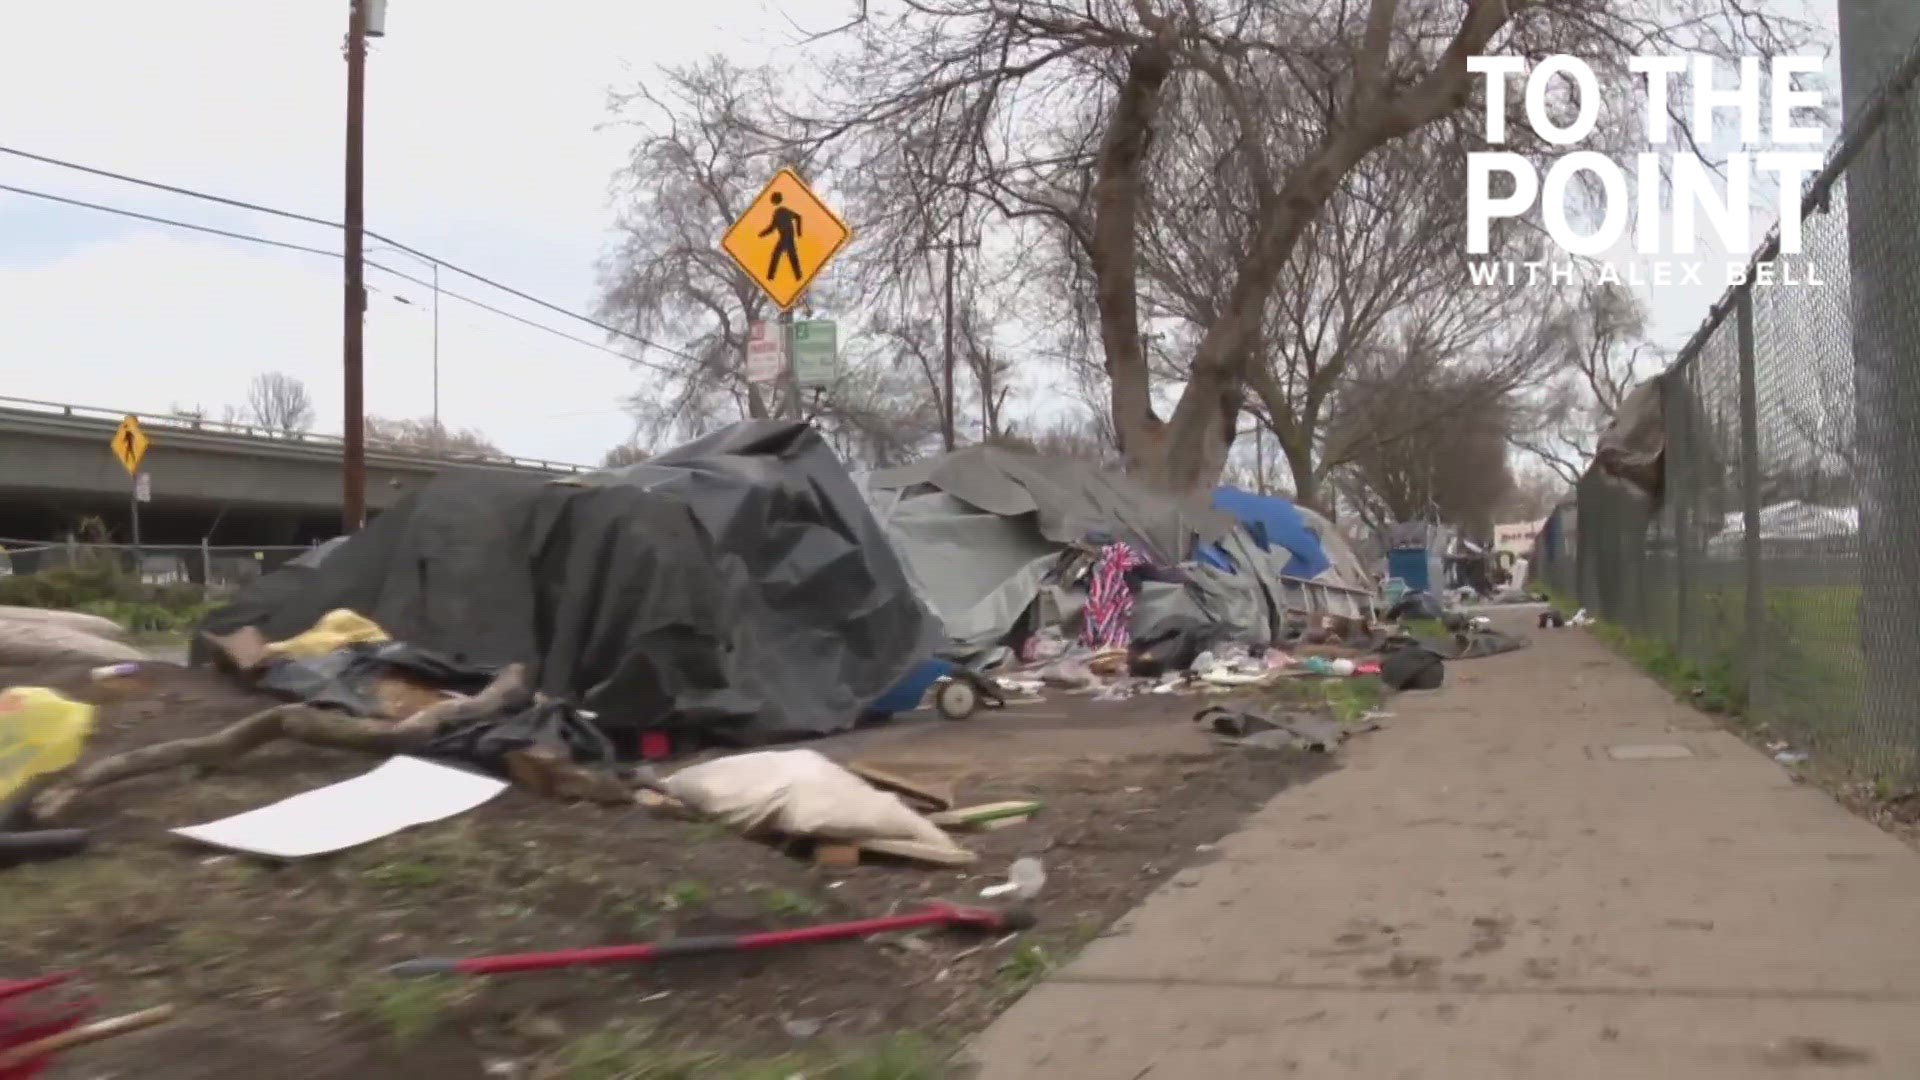 Sacramento County grand jury is criticizing county officials' response to homelessness